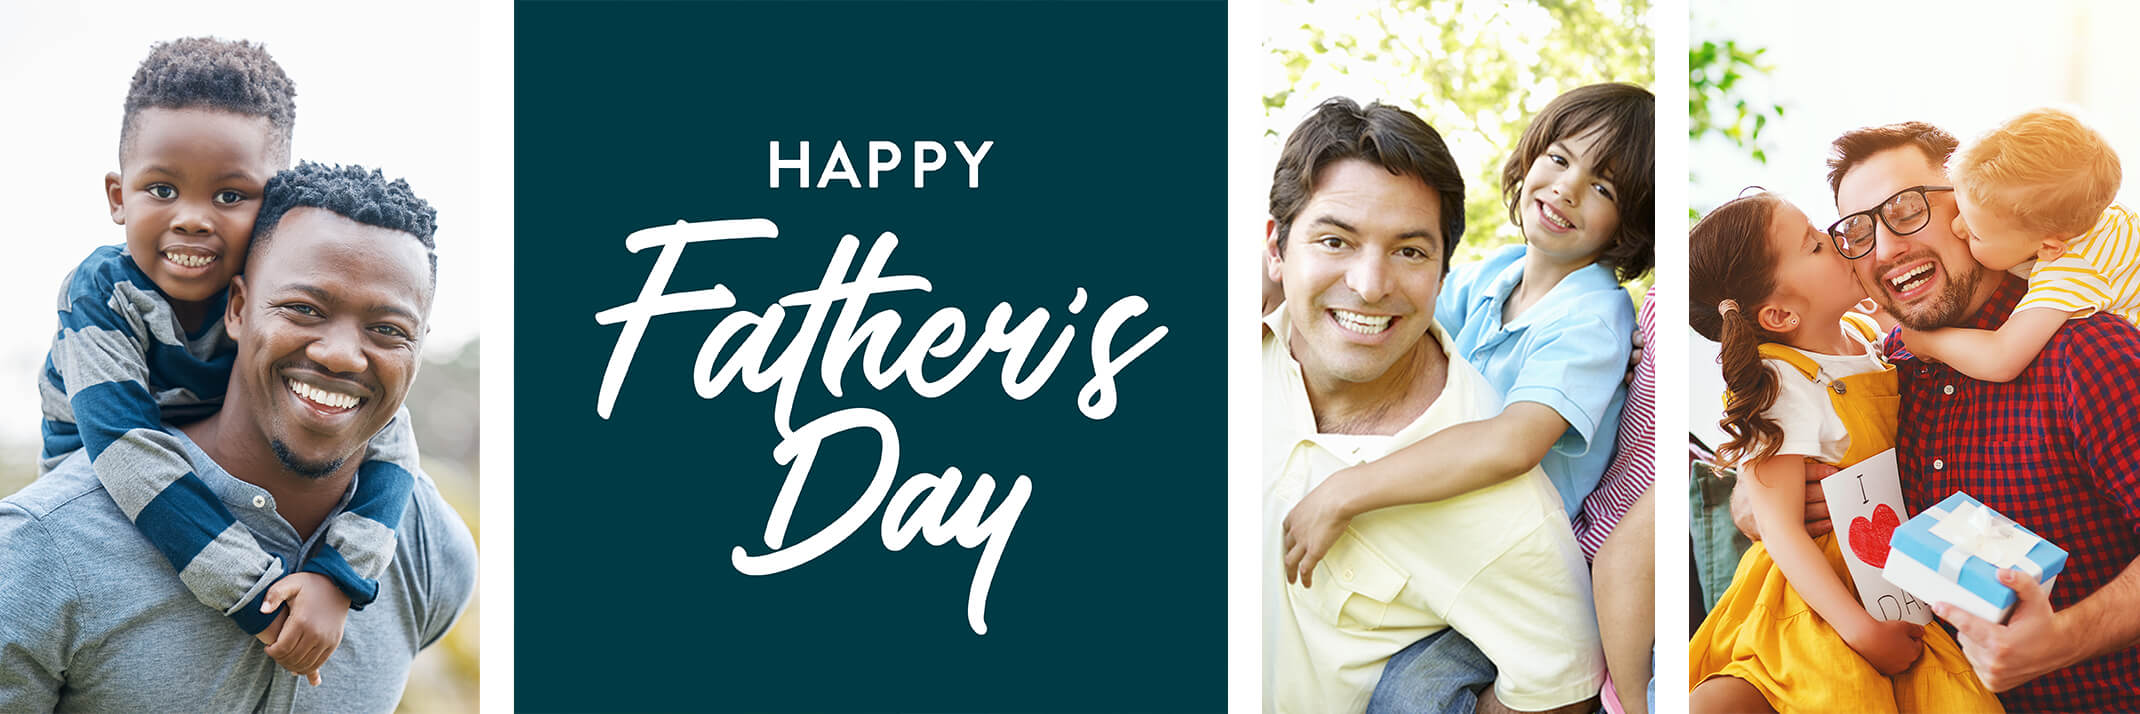 An African-American Dad with his son, Happy Father's Day white text on a blue background, a Hispanic father and son, and a Caucasian father with his daughter and son.